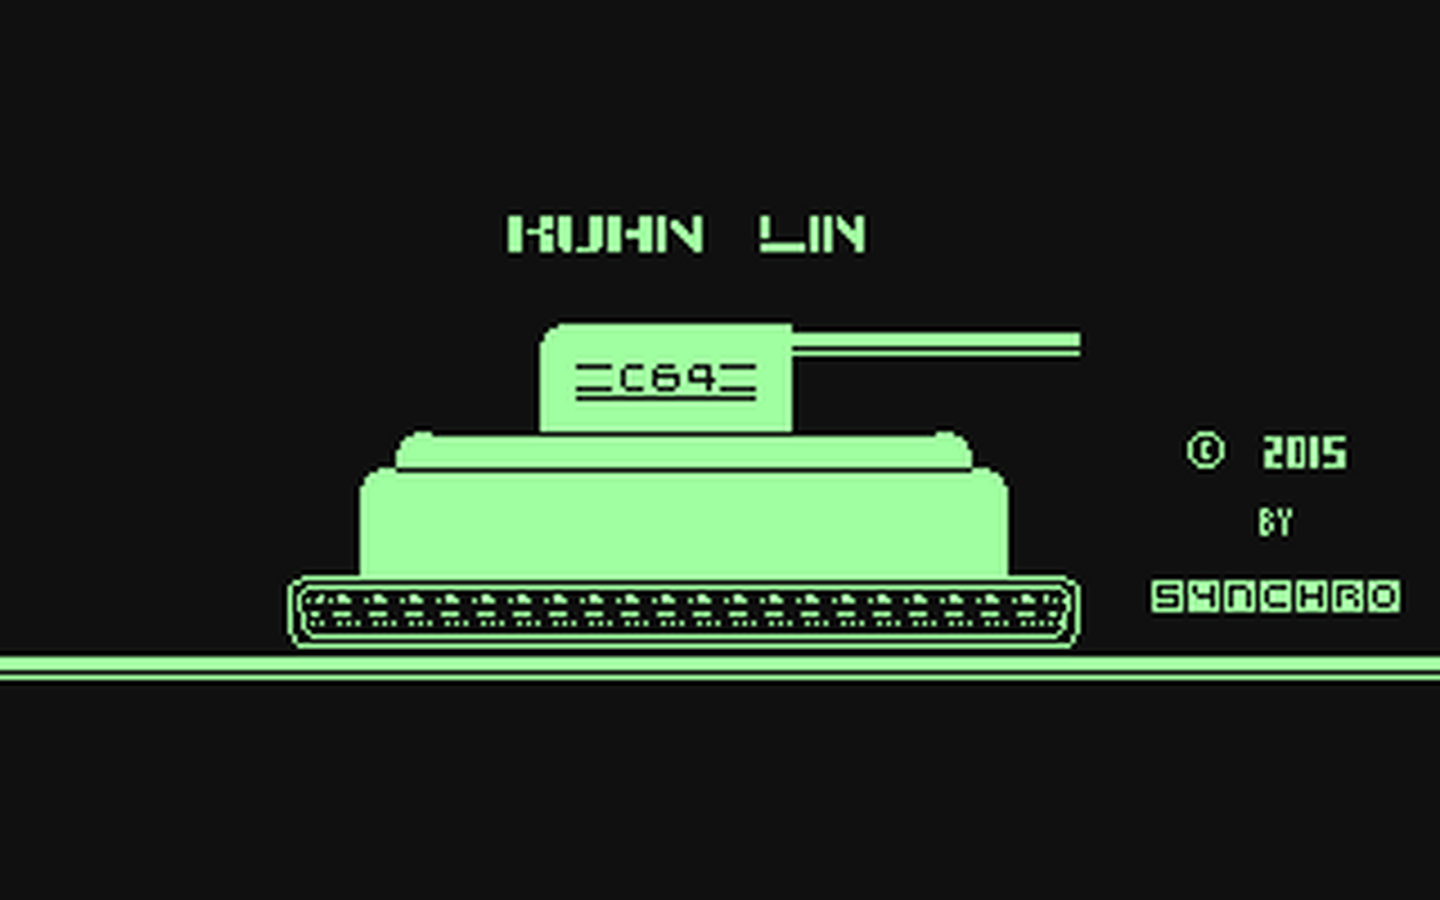 C64 GameBase Kuhn_Lin The_New_Dimension_(TND) 2015